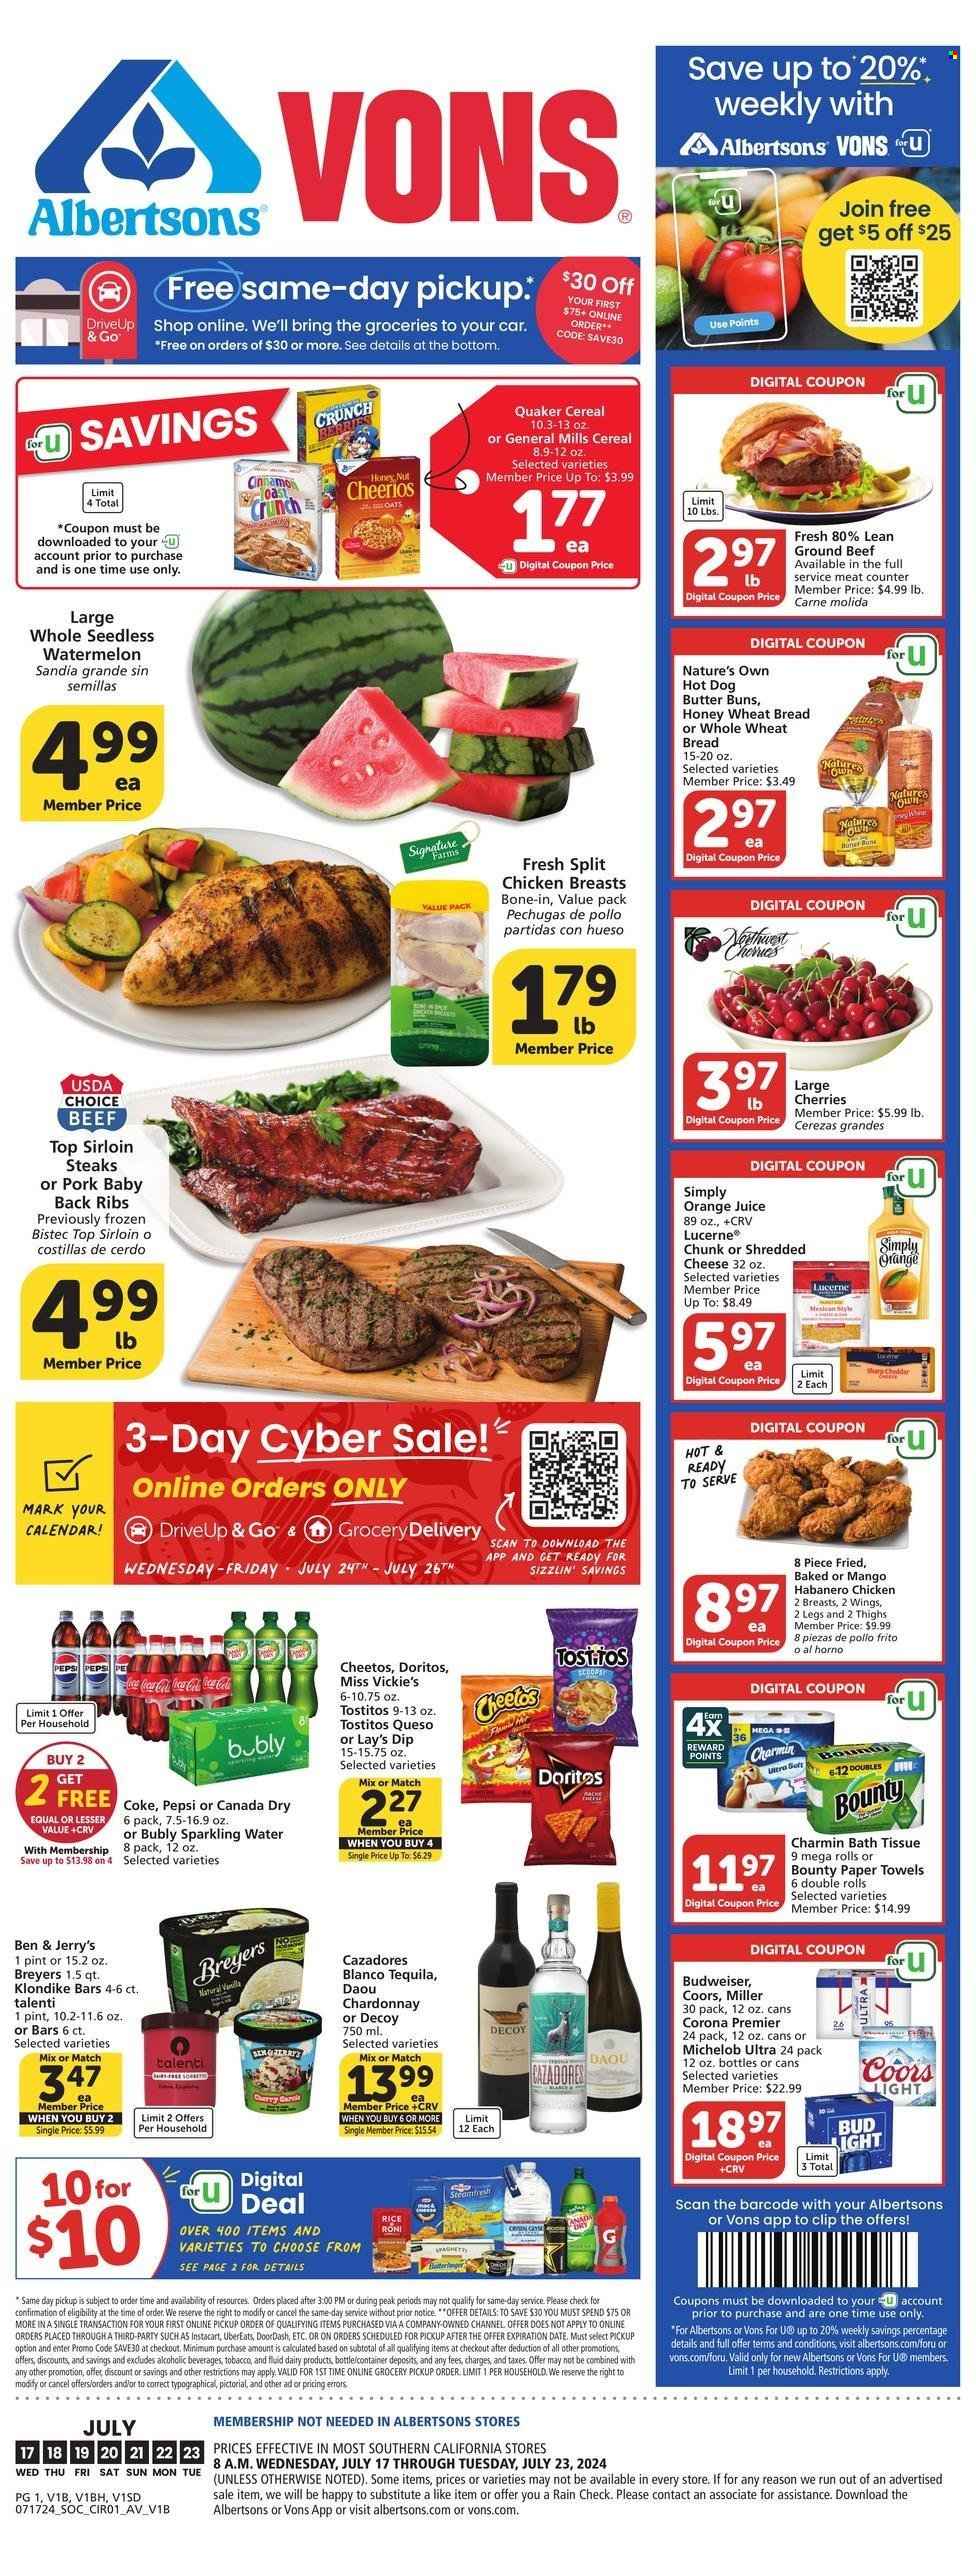 thumbnail - Vons Flyer - 07/17/2024 - 07/23/2024 - Sales products - bread, wheat bread, buns, cherries, chicken breasts, beef meat, ground beef, steak, sirloin steak, ribs, pork meat, pork ribs, pork back ribs, hot dog, fried chicken, Quaker, habanero chicken, ready meal, shredded cheese, cheddar, chunk cheese, dip, ice cream, ice cream bars, Ben & Jerry's, Talenti Gelato, Bounty, General Mills, Doritos, Cheetos, Lay’s, Tostitos, salty snack, cereals, Cheerios, rice, Canada Dry, Coca-Cola, ginger ale, Pepsi, orange juice, juice, soft drink, Coke, sparkling water, water, carbonated soft drink, white wine, Chardonnay, wine, alcohol, tequila, beer, Budweiser, Corona Extra, bath tissue, kitchen towels, paper towels, Charmin, calendar, Nature's Own, Coors, Michelob. Page 1.